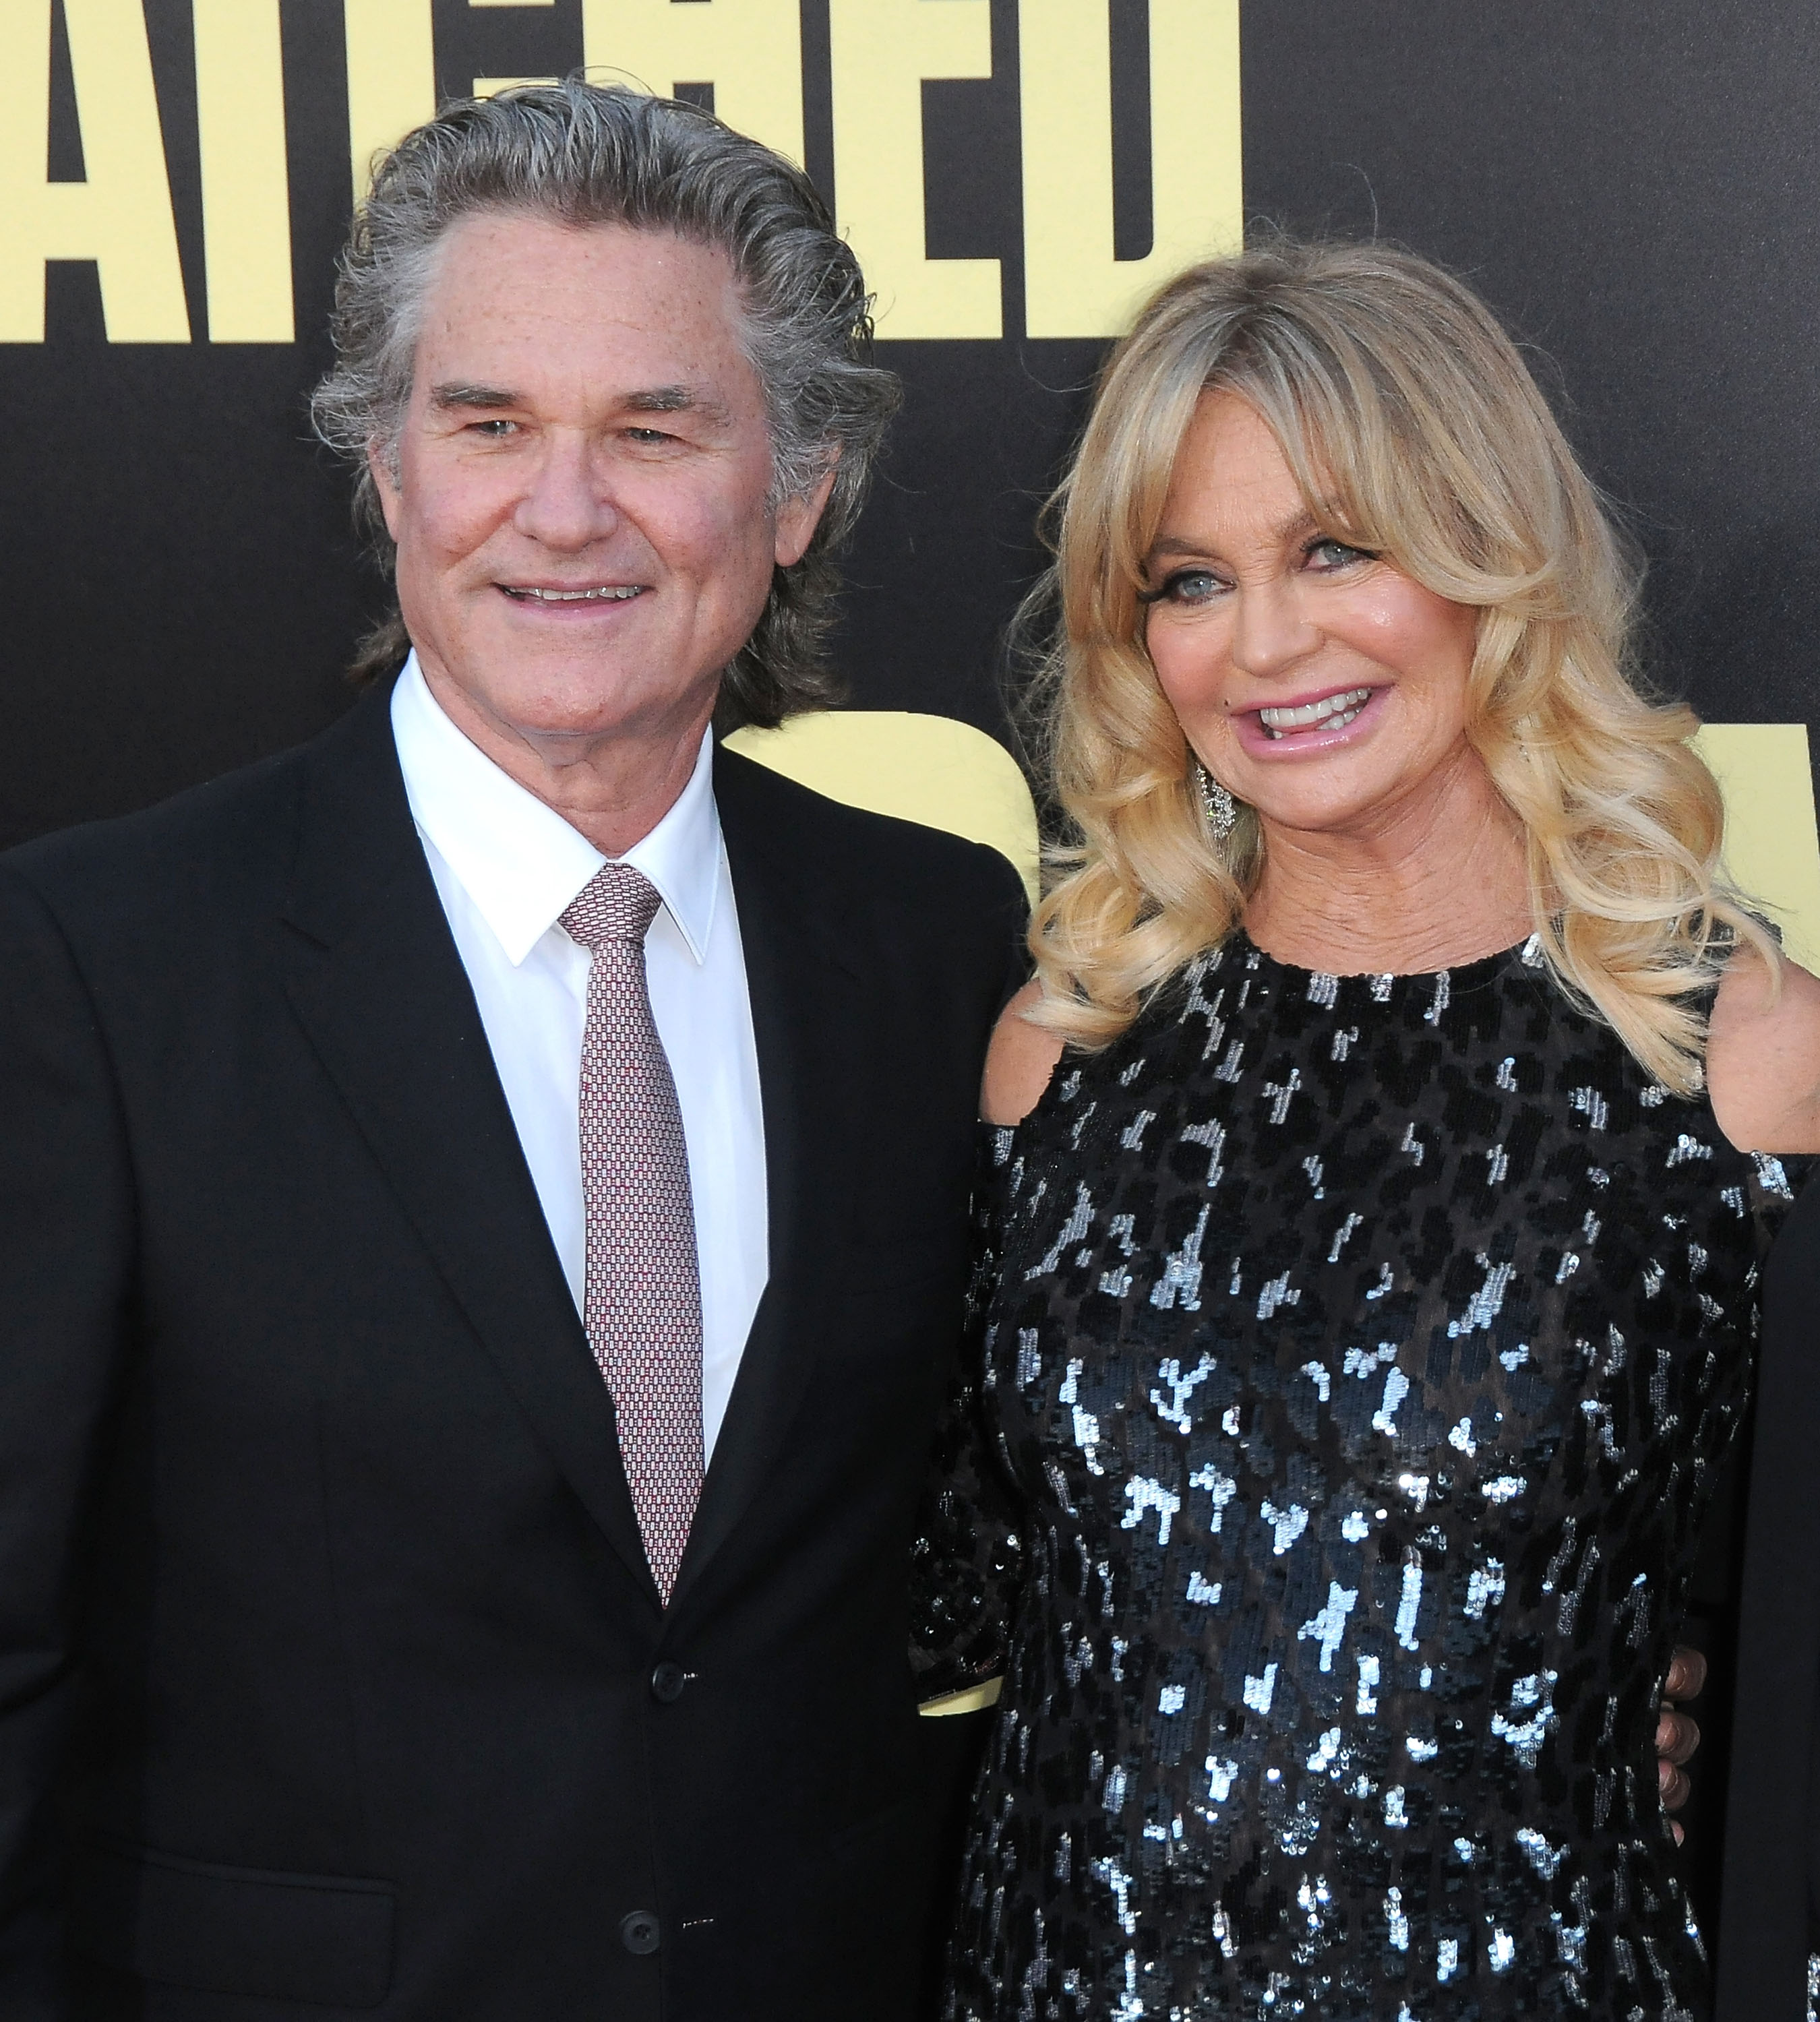 Kurt Russell and Goldie Hawn attend the premiere of "Snatched" in Westwood, California on May 10, 2017 | Photo: Getty Images